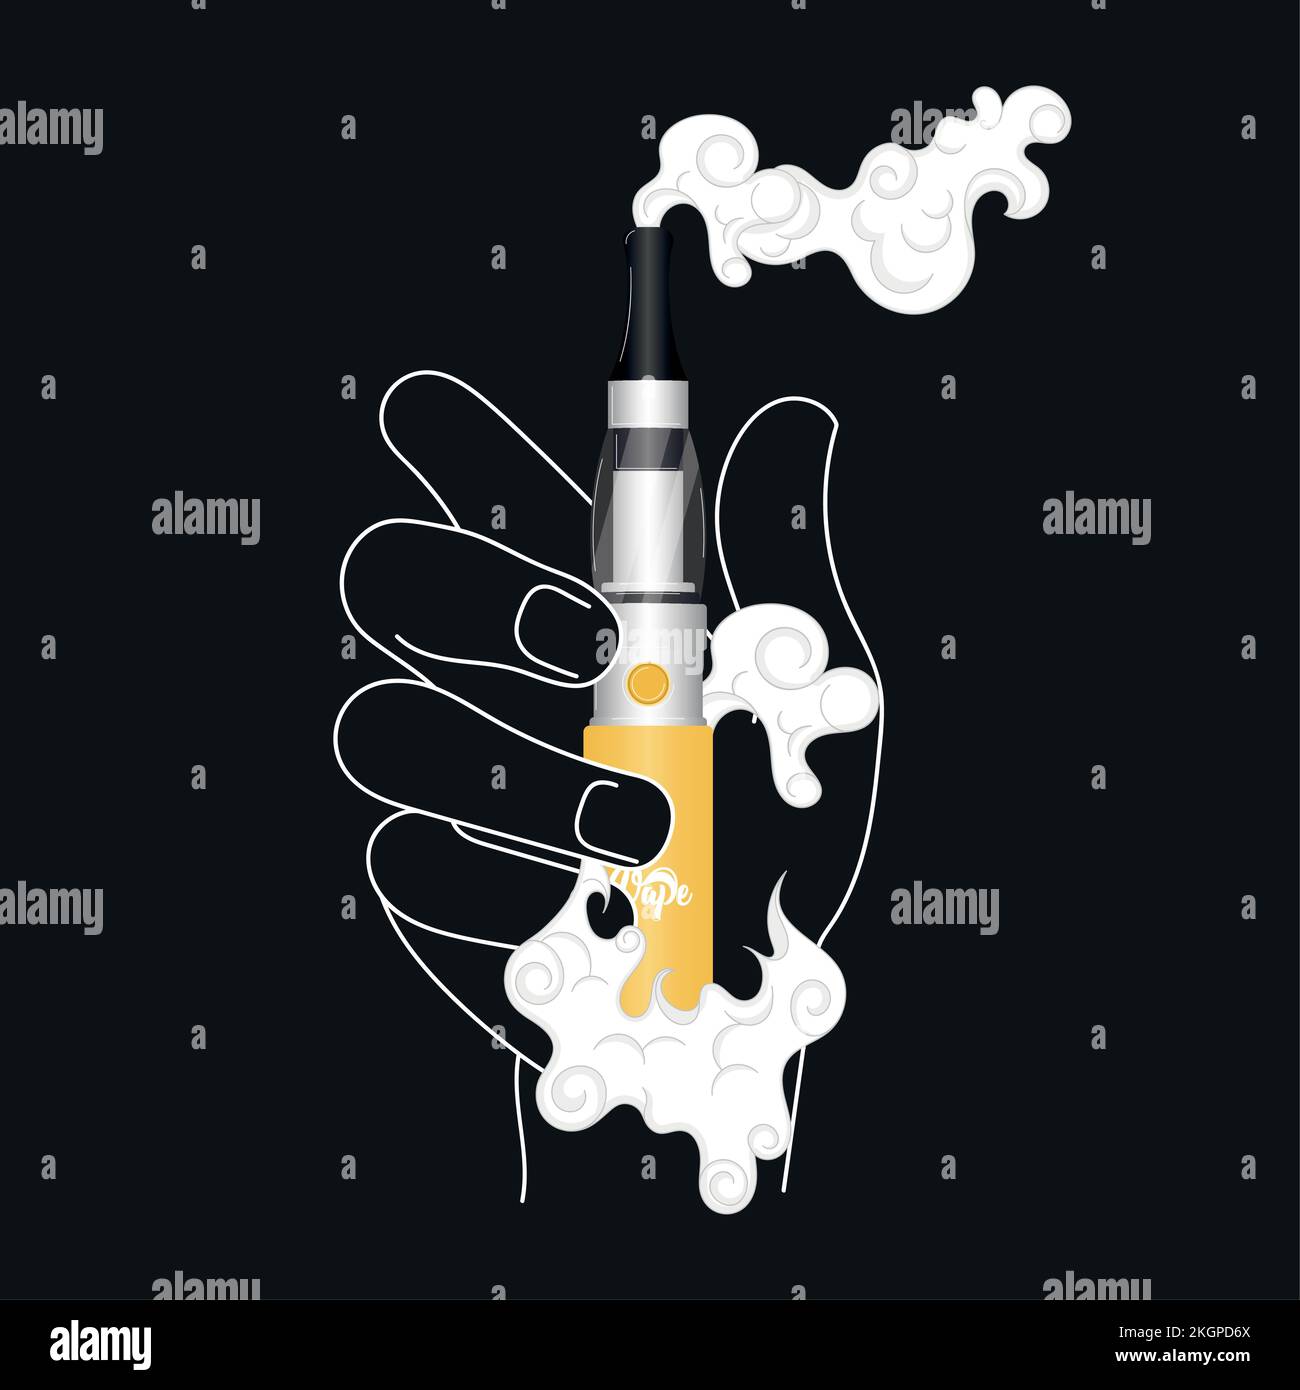 Hand holding a yellow electronic cigarette icon Vector Stock Vector